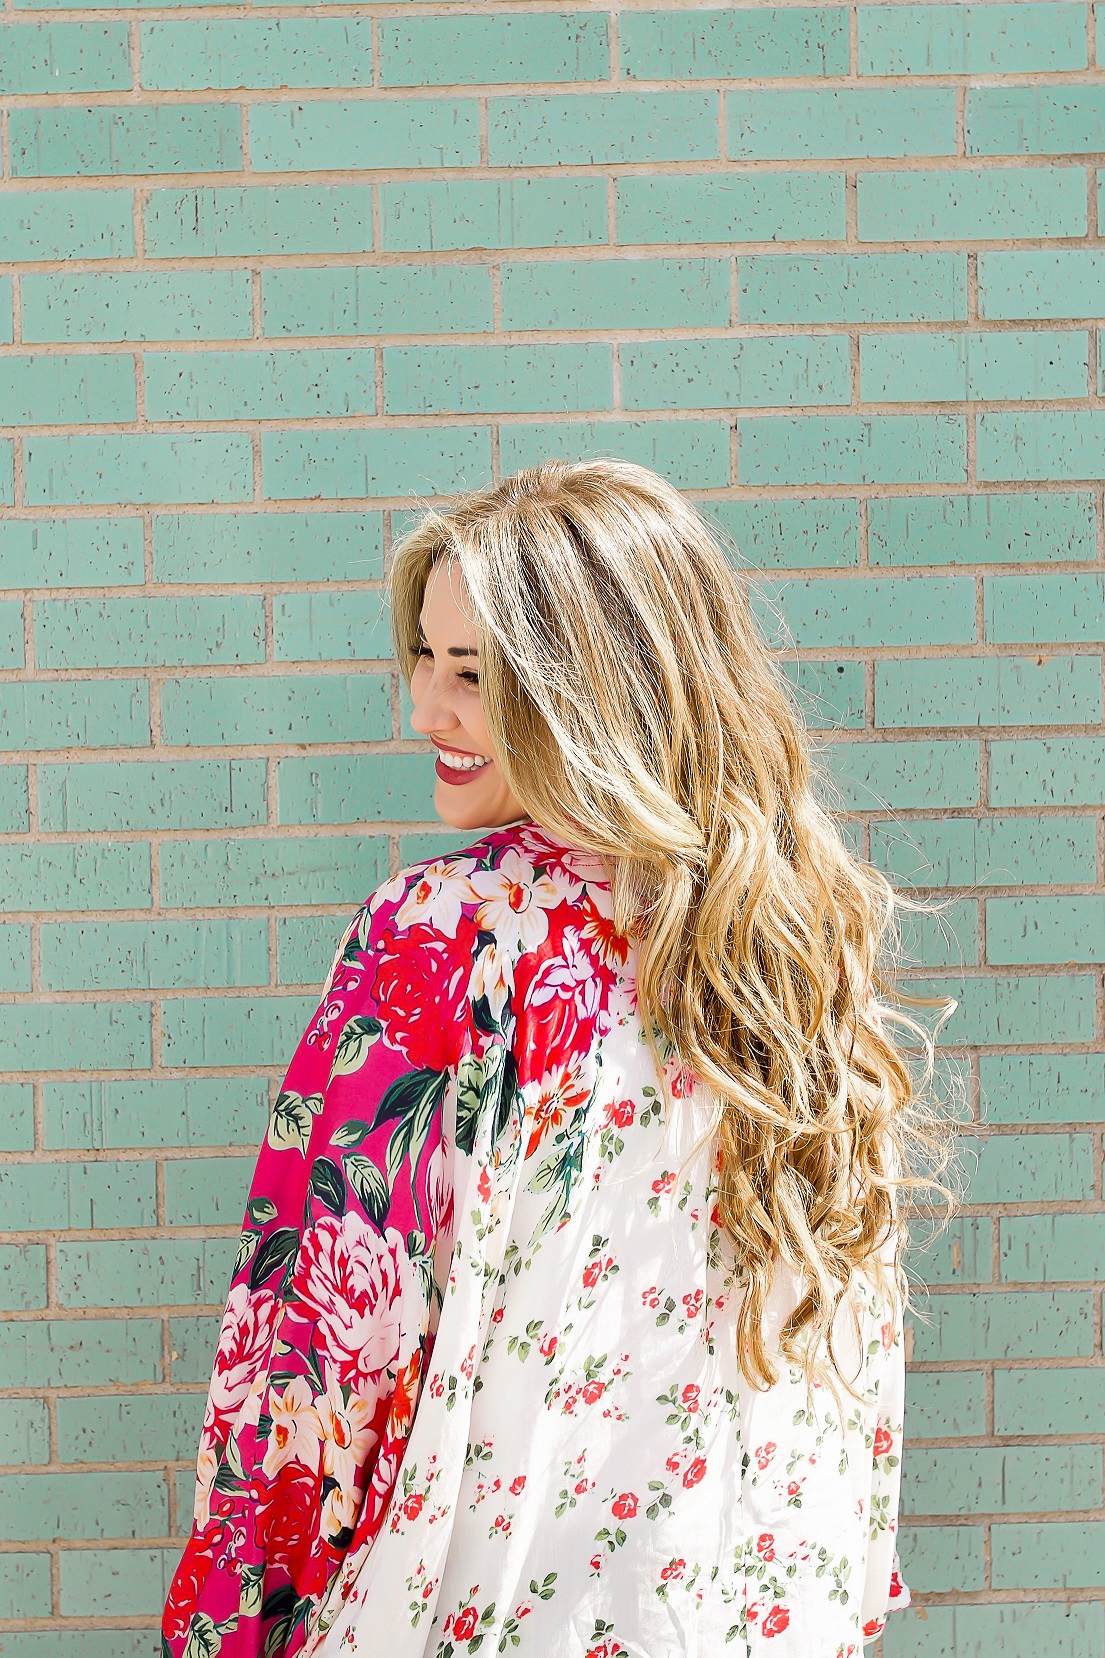 Spring Favorites by popular style blogger Walking in Memphis in High Heels